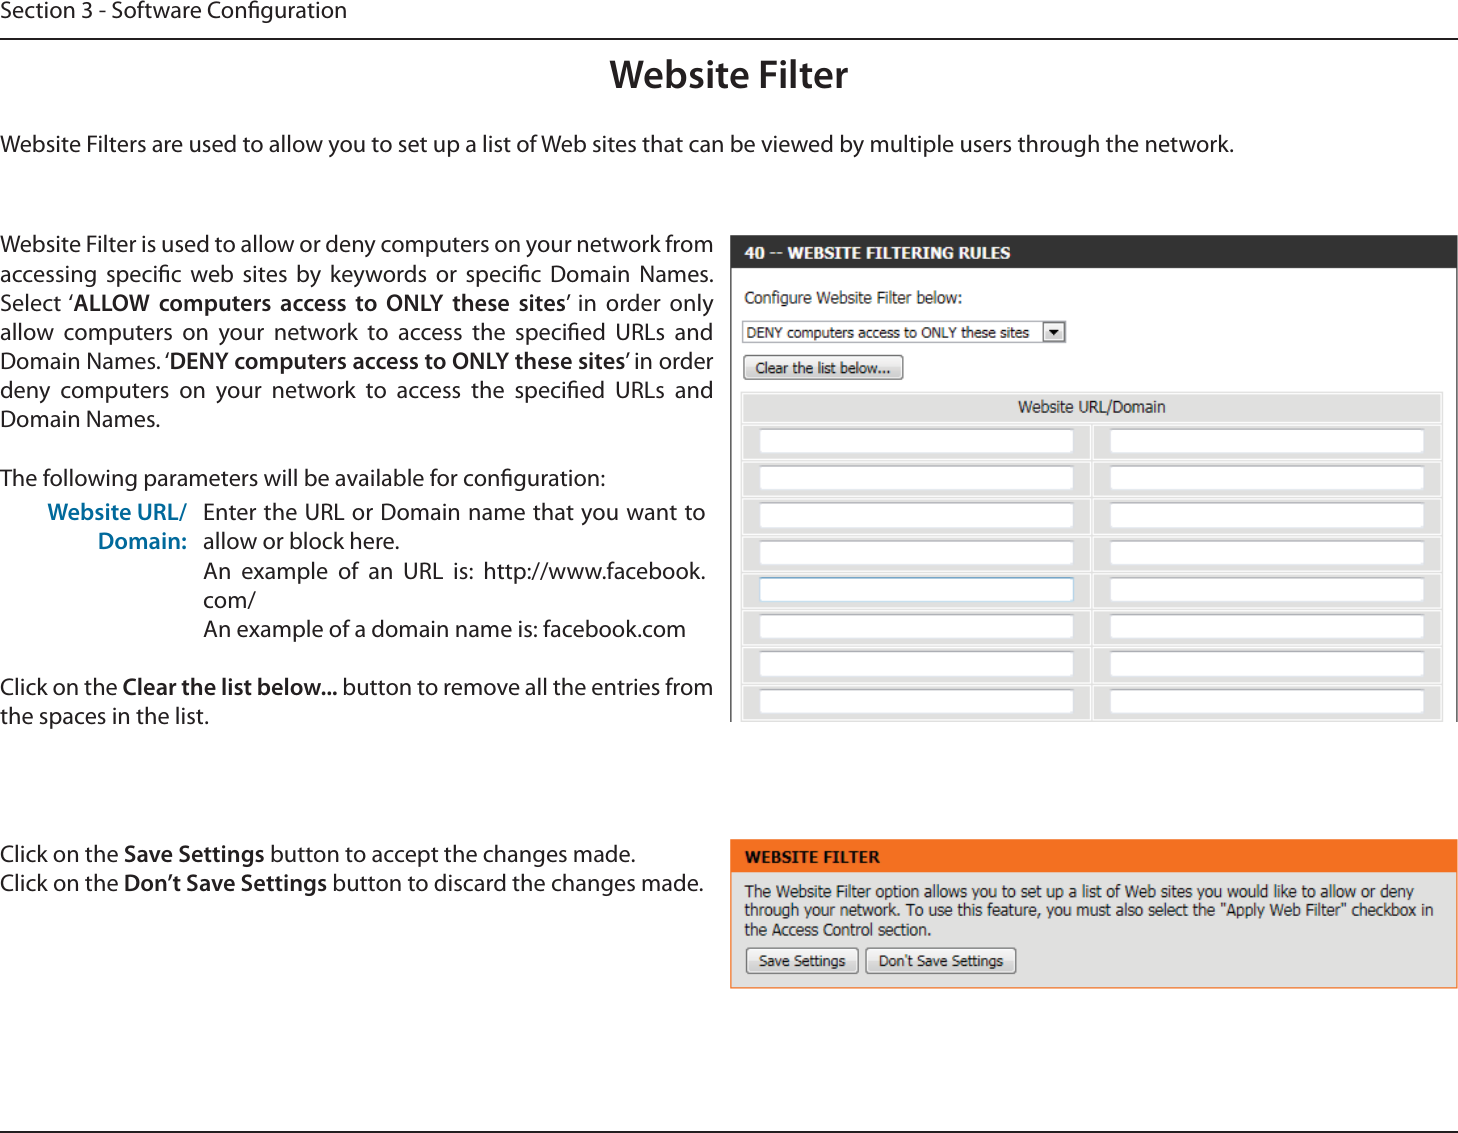 Section 3 - Software CongurationWebsite FilterWebsite Filters are used to allow you to set up a list of Web sites that can be viewed by multiple users through the network.Website Filter is used to allow or deny computers on your network from accessing specic web sites by keywords or specic Domain Names. Select ‘ALLOW computers access to ONLY these sites’ in order only allow computers on your network to access the specied URLs and Domain Names. ‘DENY computers access to ONLY these sites’ in order deny computers on your network to access the specied URLs and Domain Names.The following parameters will be available for conguration:Website URL/Domain:Enter the URL or Domain name that you want to allow or block here.An example of an URL is: http://www.facebook.com/An example of a domain name is: facebook.comClick on the Clear the list below... button to remove all the entries from the spaces in the list.Click on the Save Settings button to accept the changes made.Click on the Don’t Save Settings button to discard the changes made.